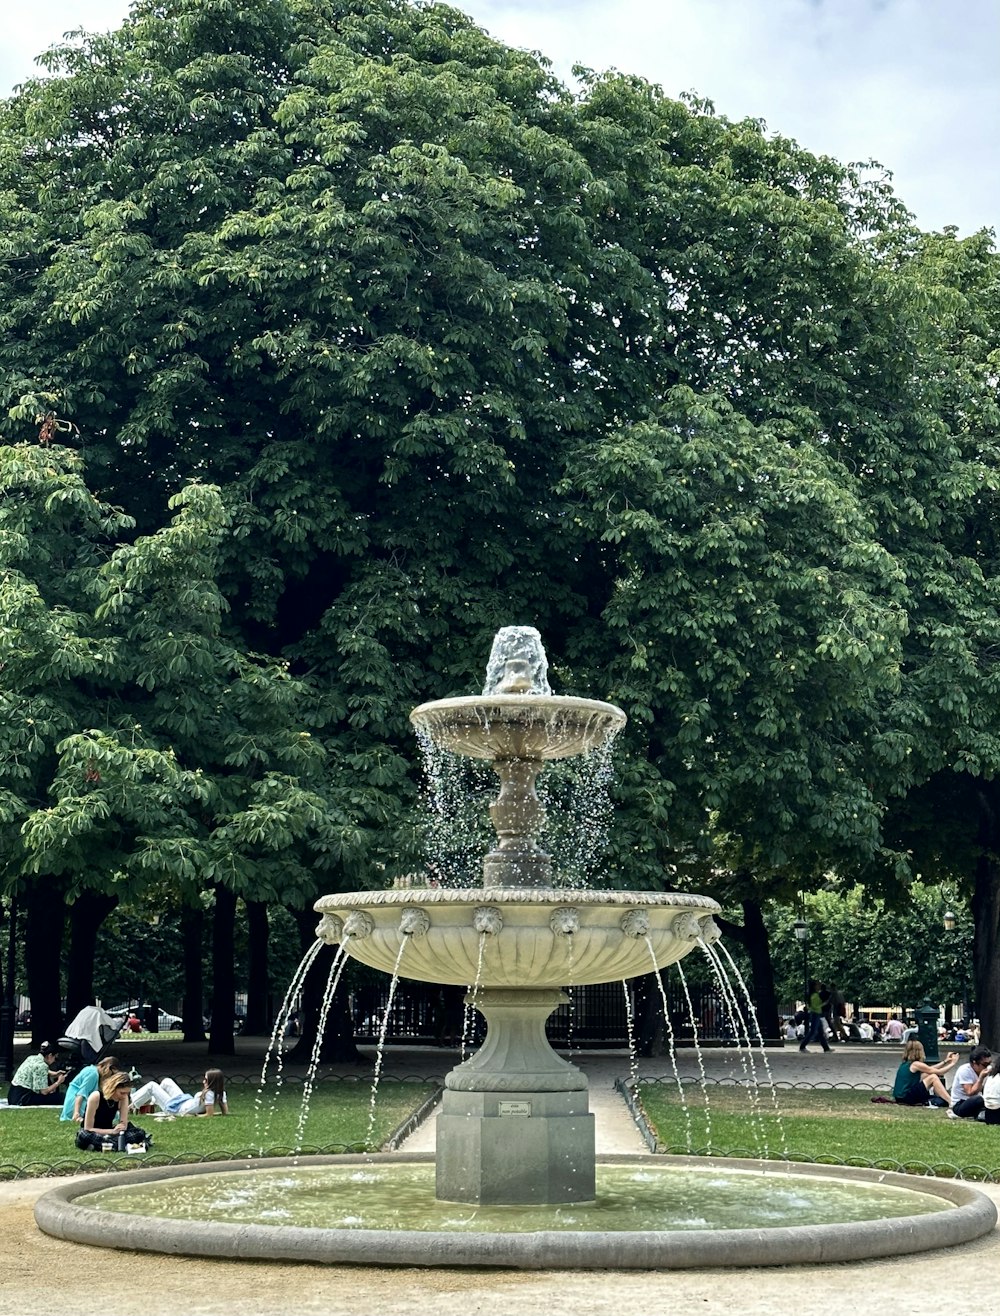 a water fountain in a park surrounded by trees